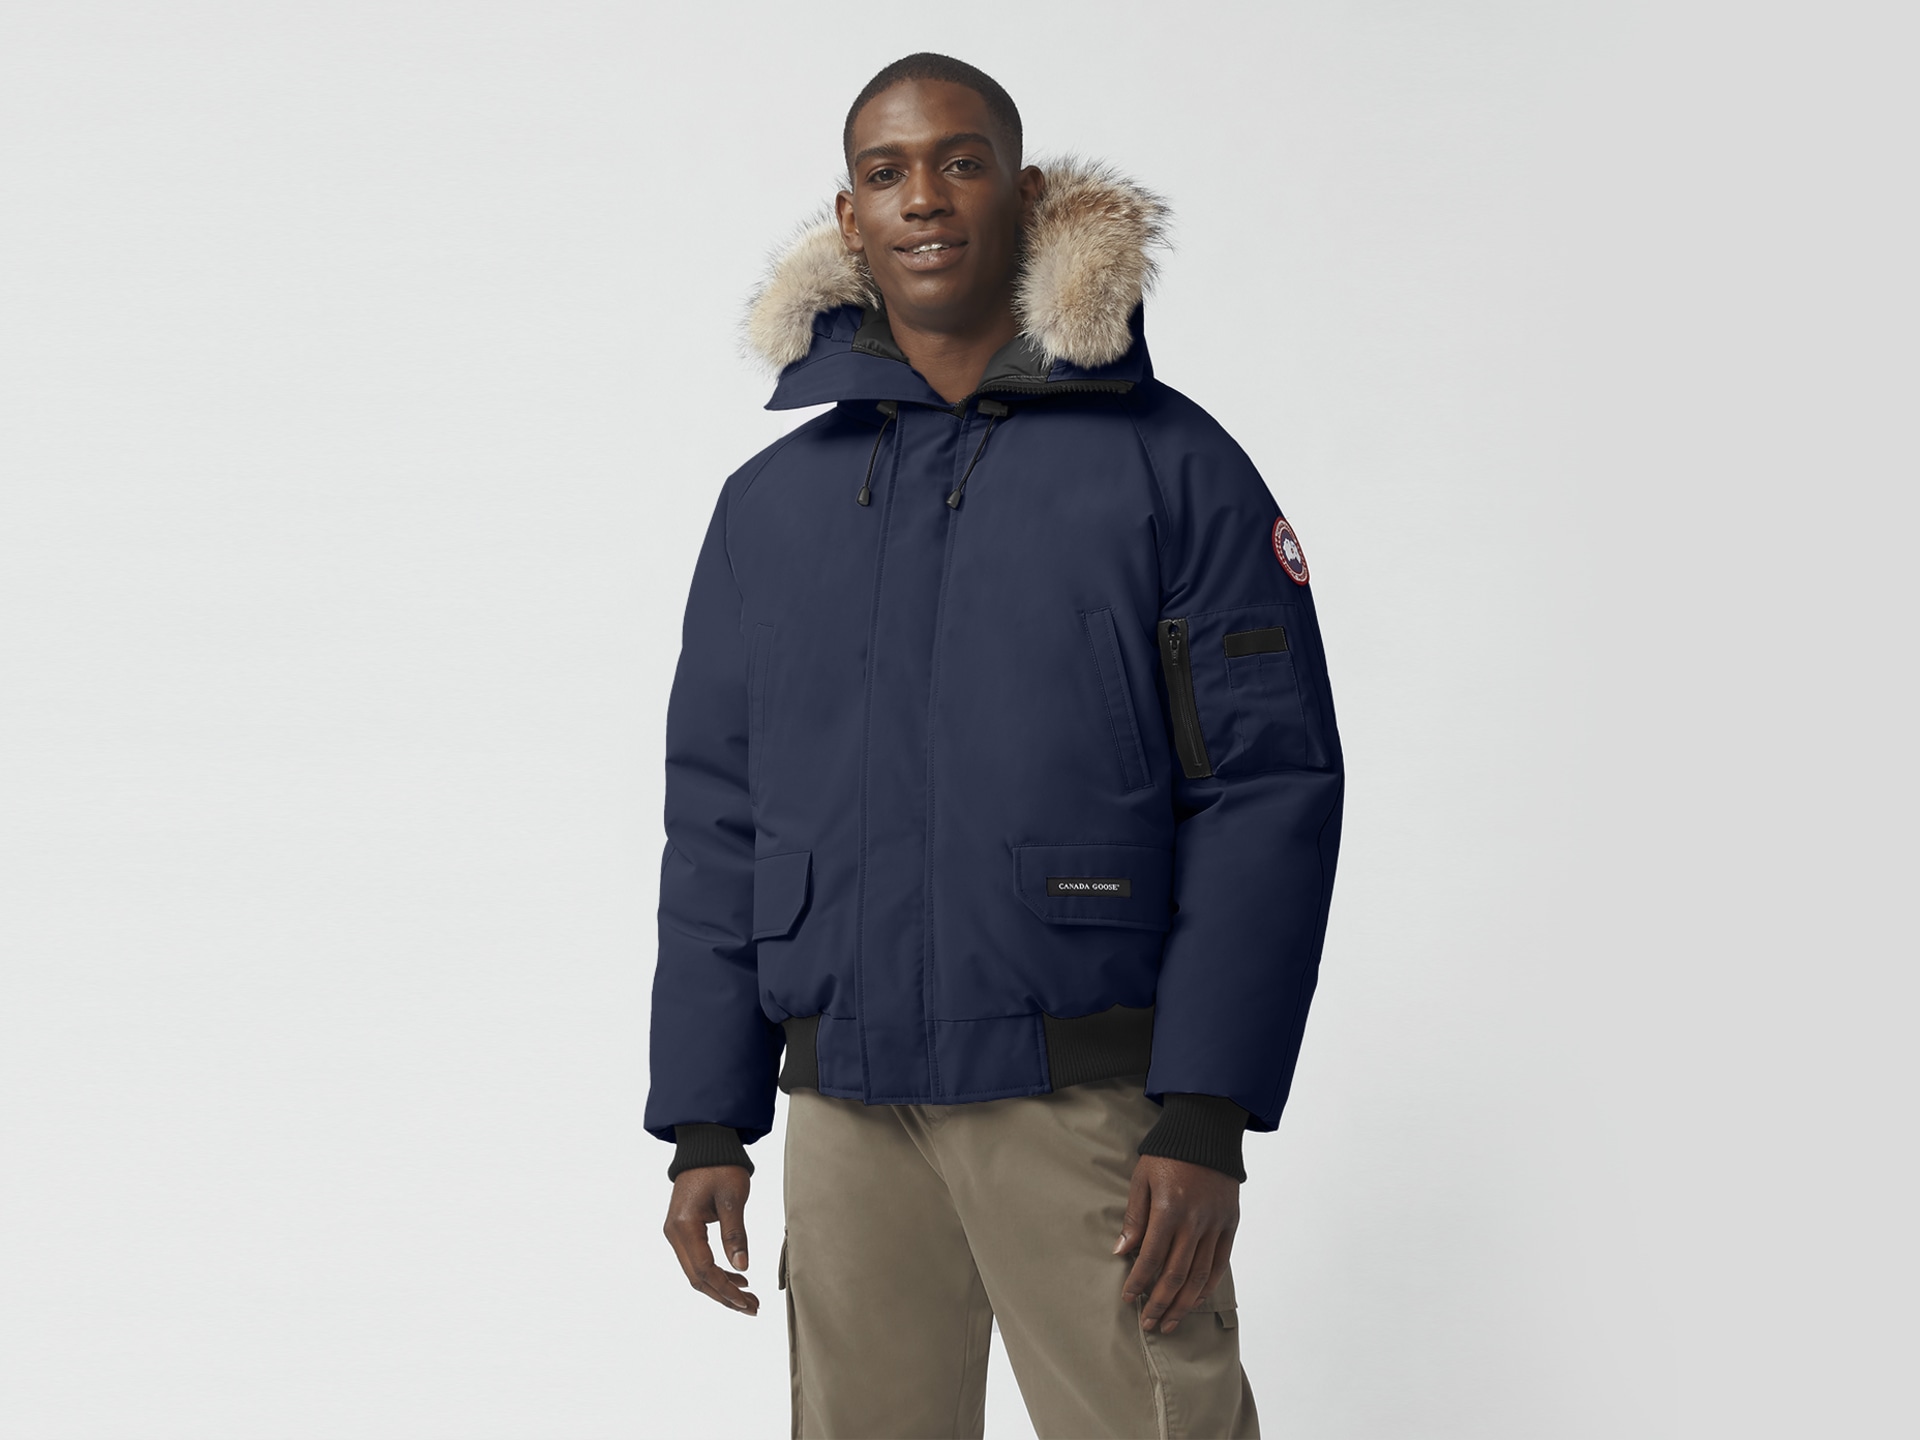 Unlock Wilderness' choice in the Canada Goose Vs North Face comparison, the Chilliwack Bomber Heritage by Canada Goose